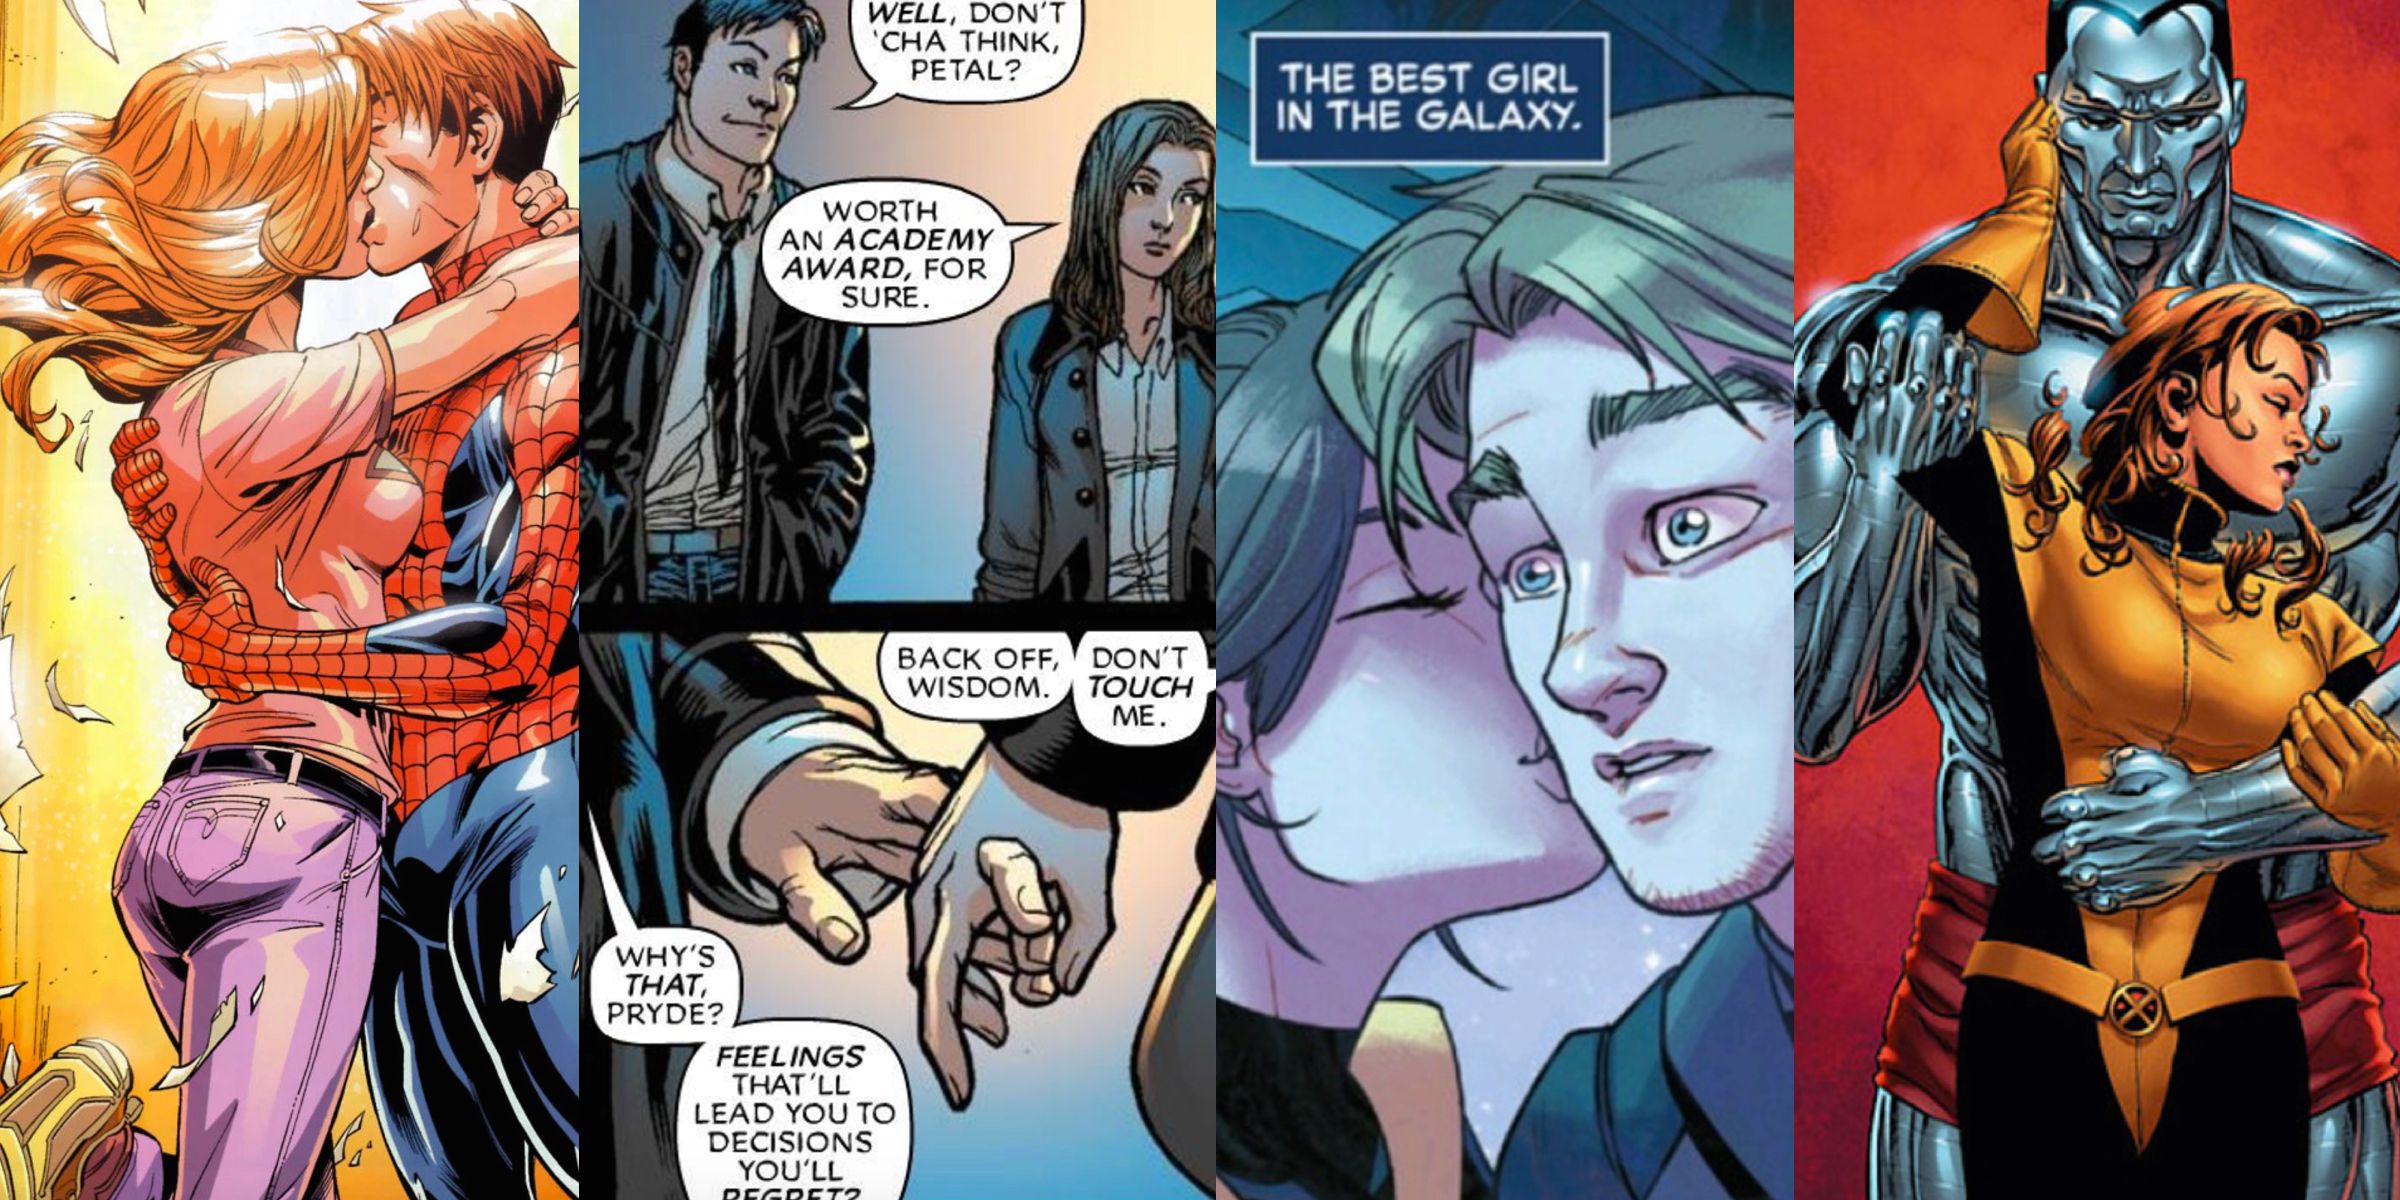 The Many Loves of Kitty Pryde Peter Parker Pete Wisdom Peter Quill Piotr Rasputin